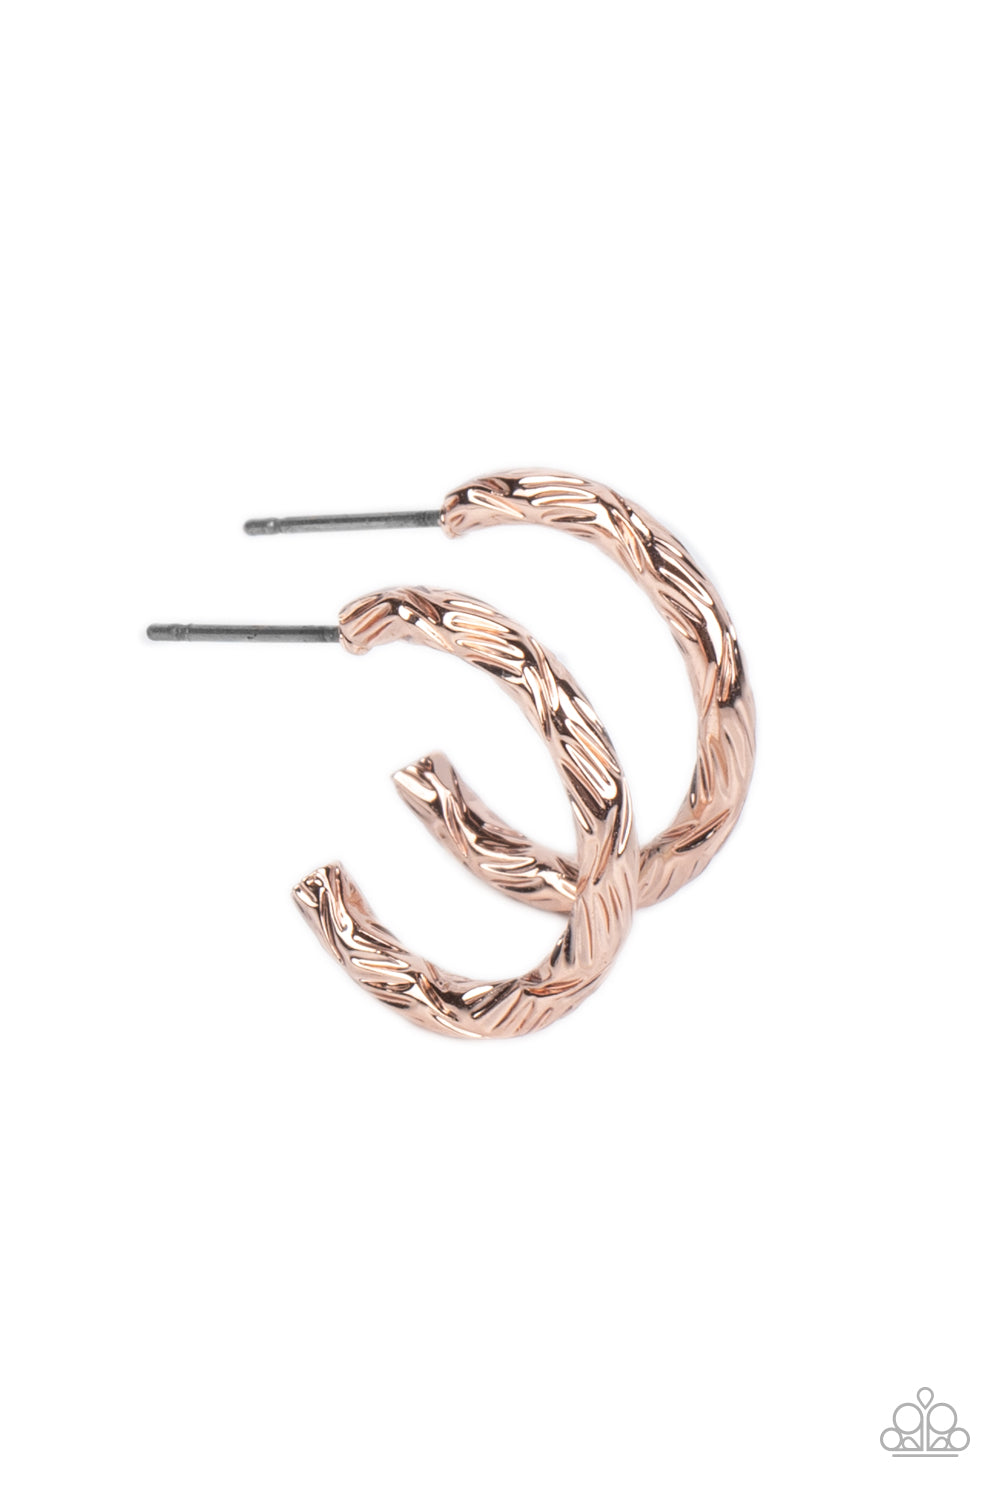 five-dollar-jewelry-triumphantly-textured-rose-gold-paparazzi-accessories